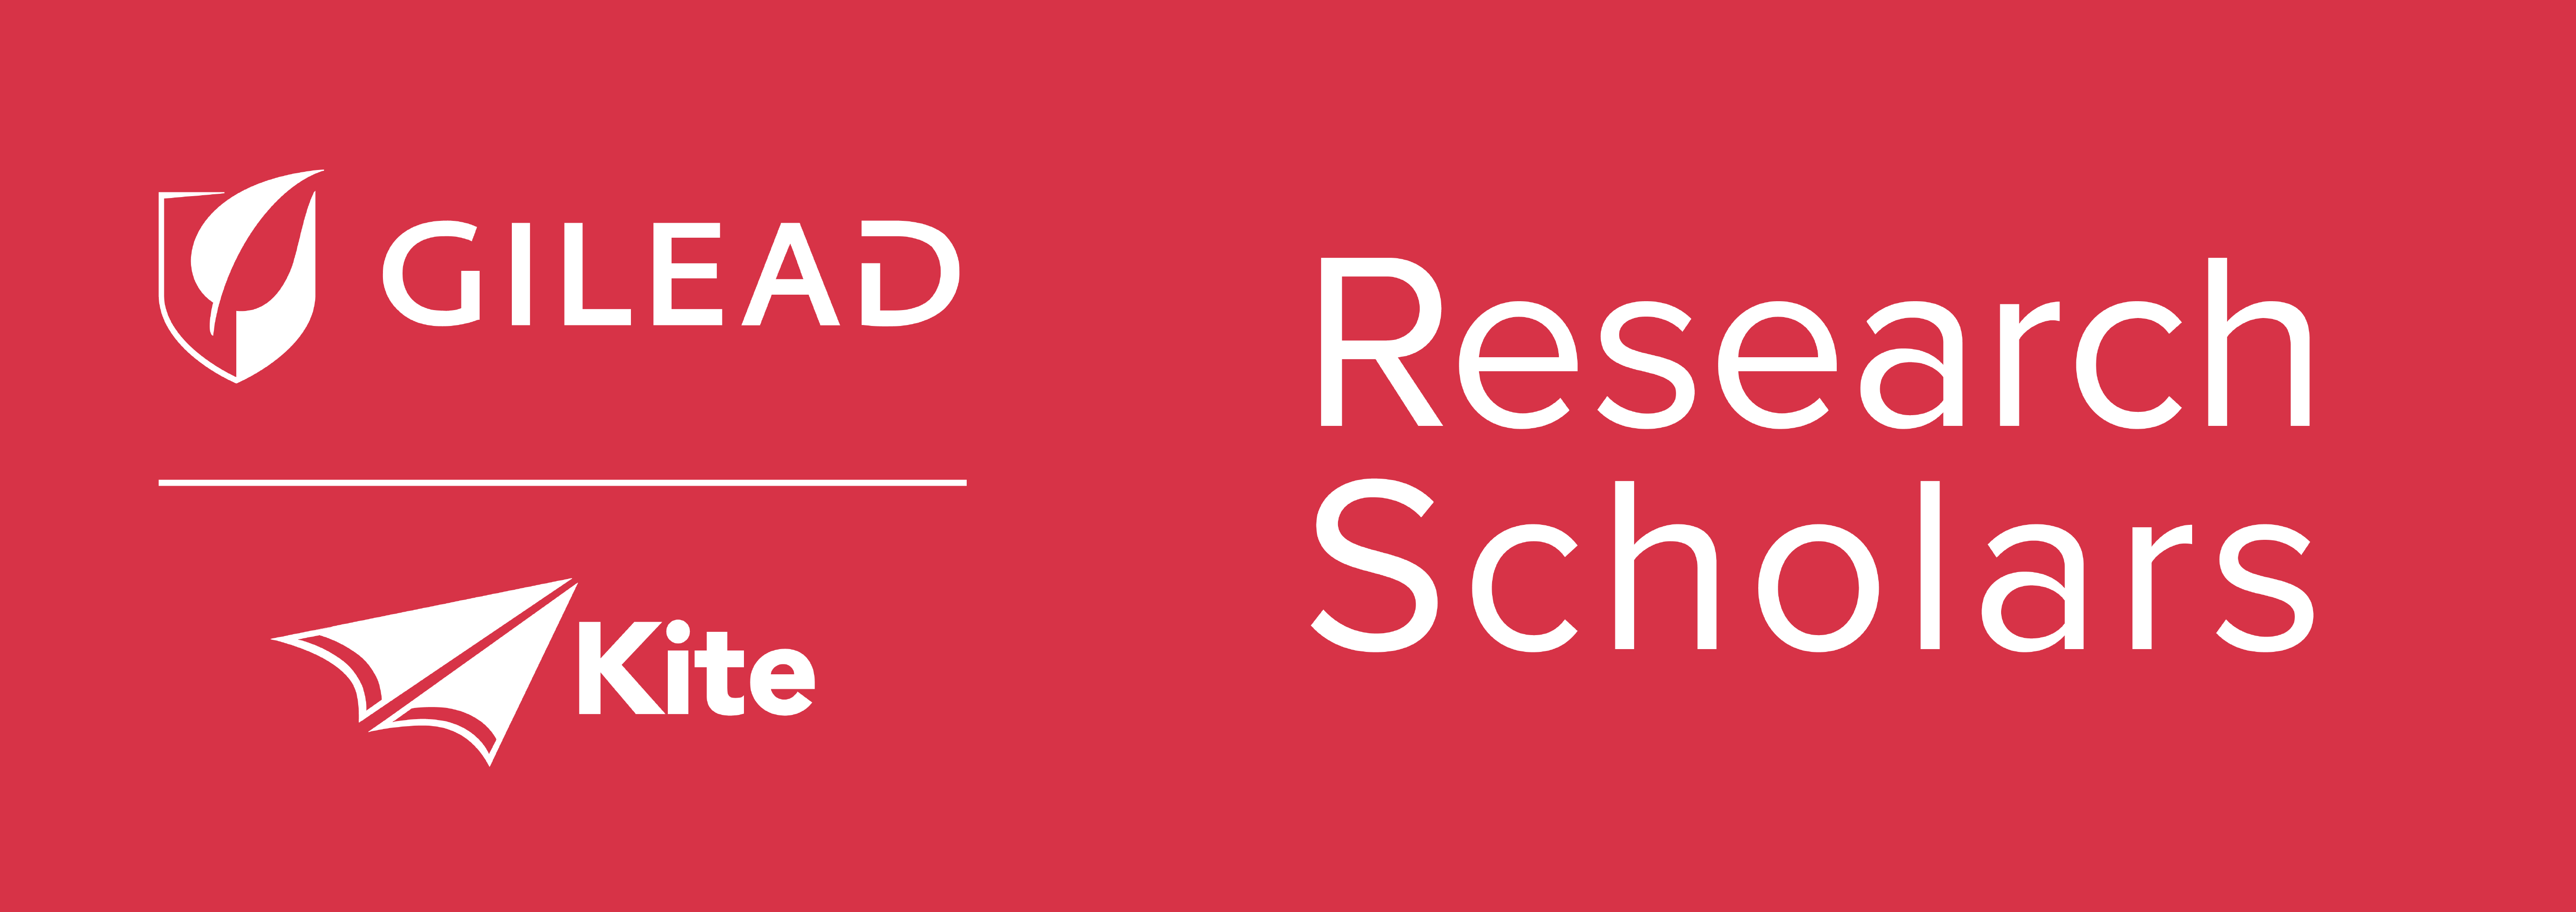 Gilead Research Scholars